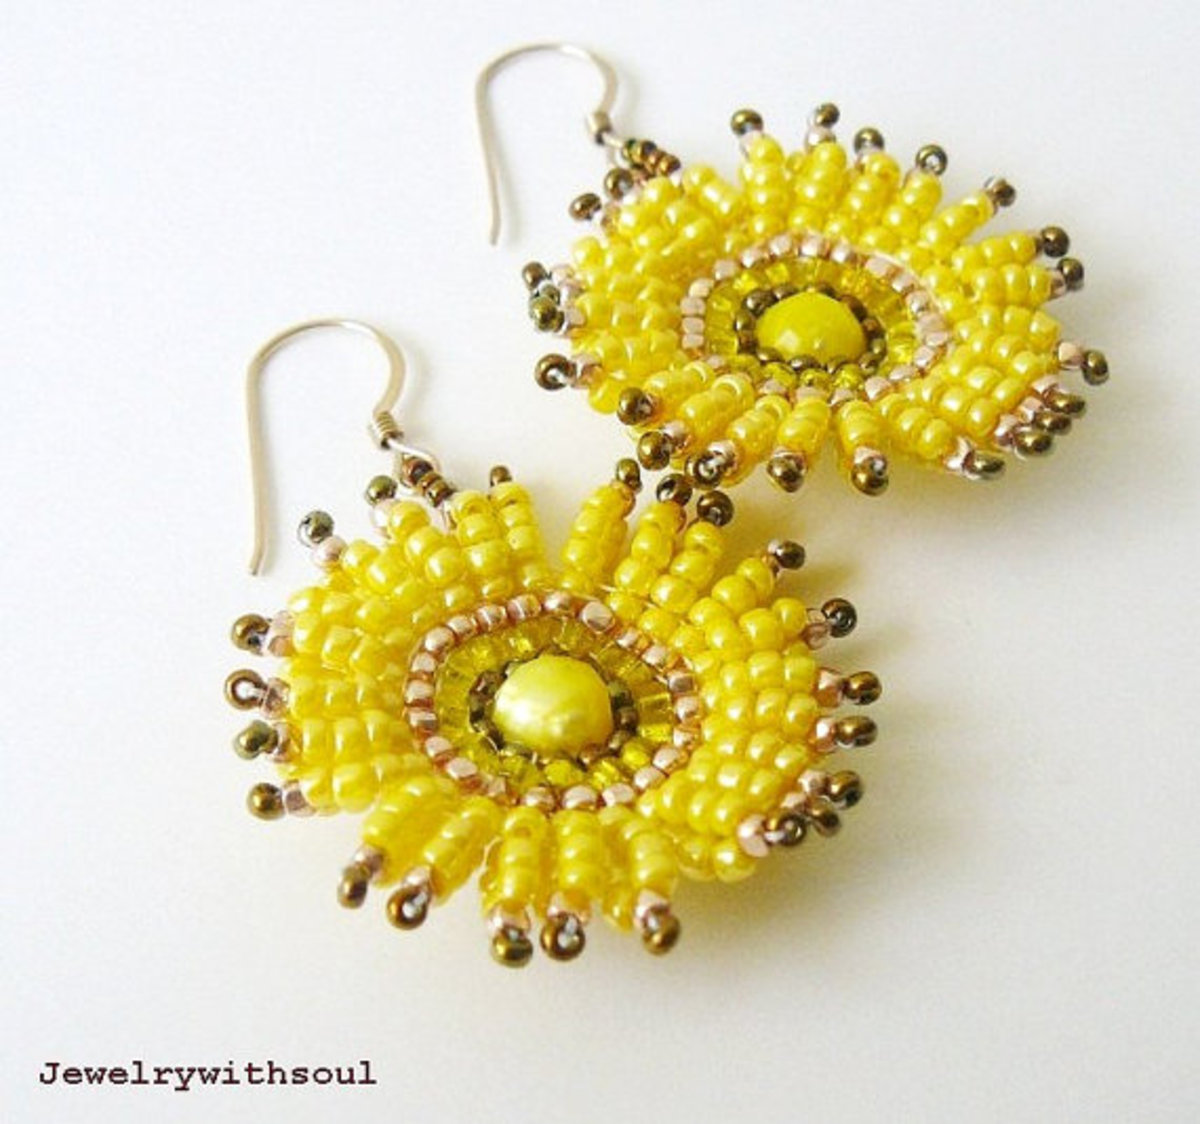 This pair of yellow beaded flower earrings resemble daisies or sunflowers.